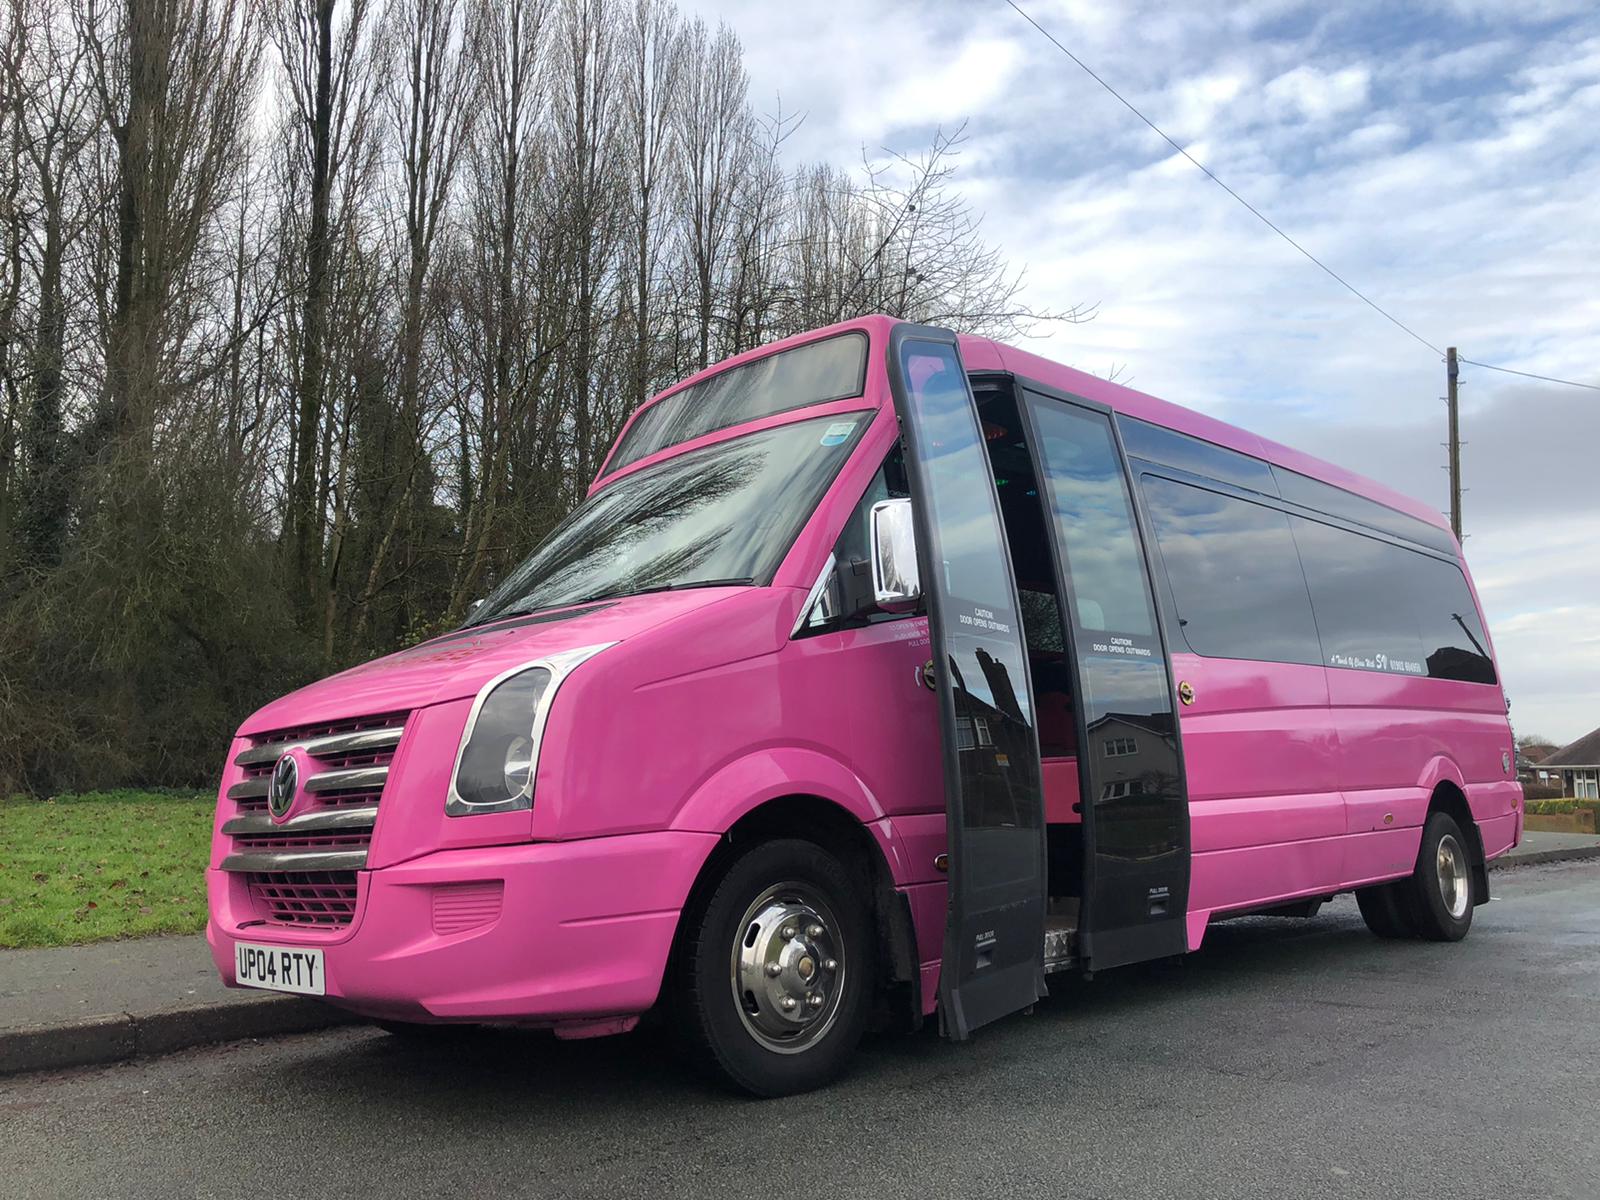 Maximising Fun on Wheels: Essential Tips for a Safe and Memorable UK Party Bus Experience